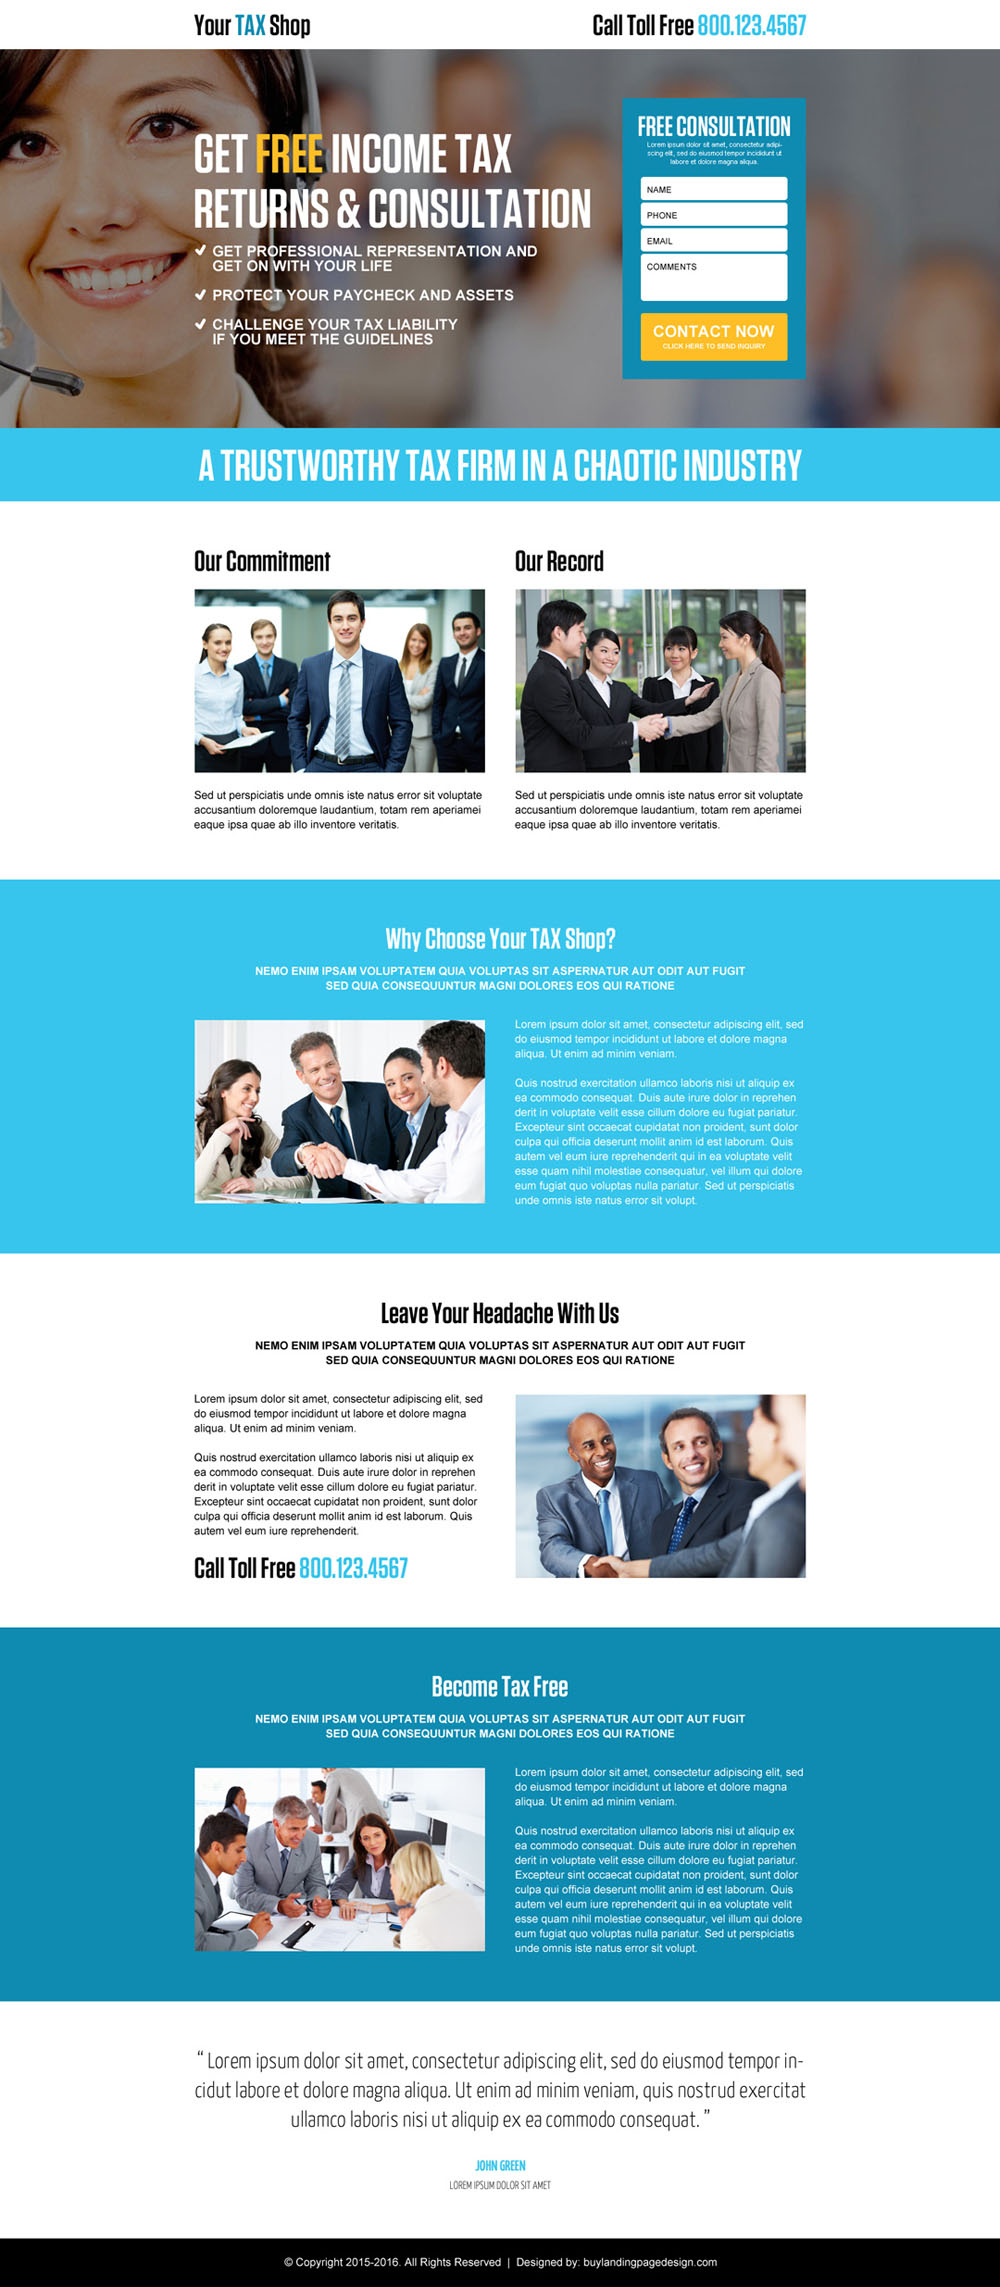 income-tax-return-free-consultation-lead-generation-landing-page-design-001